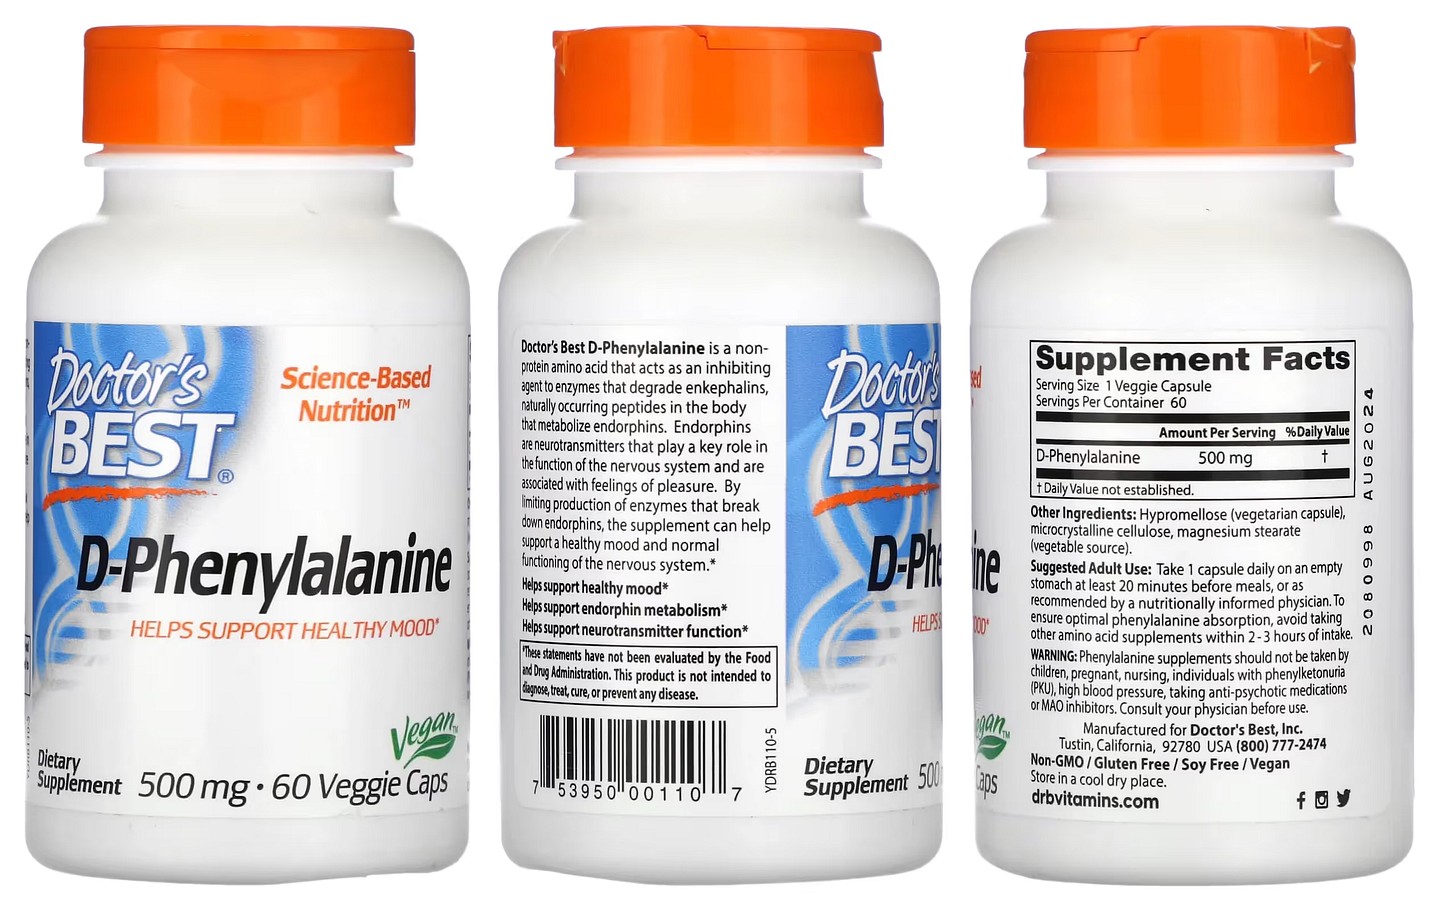 Doctor's Best, D-Phenylalanine packaging